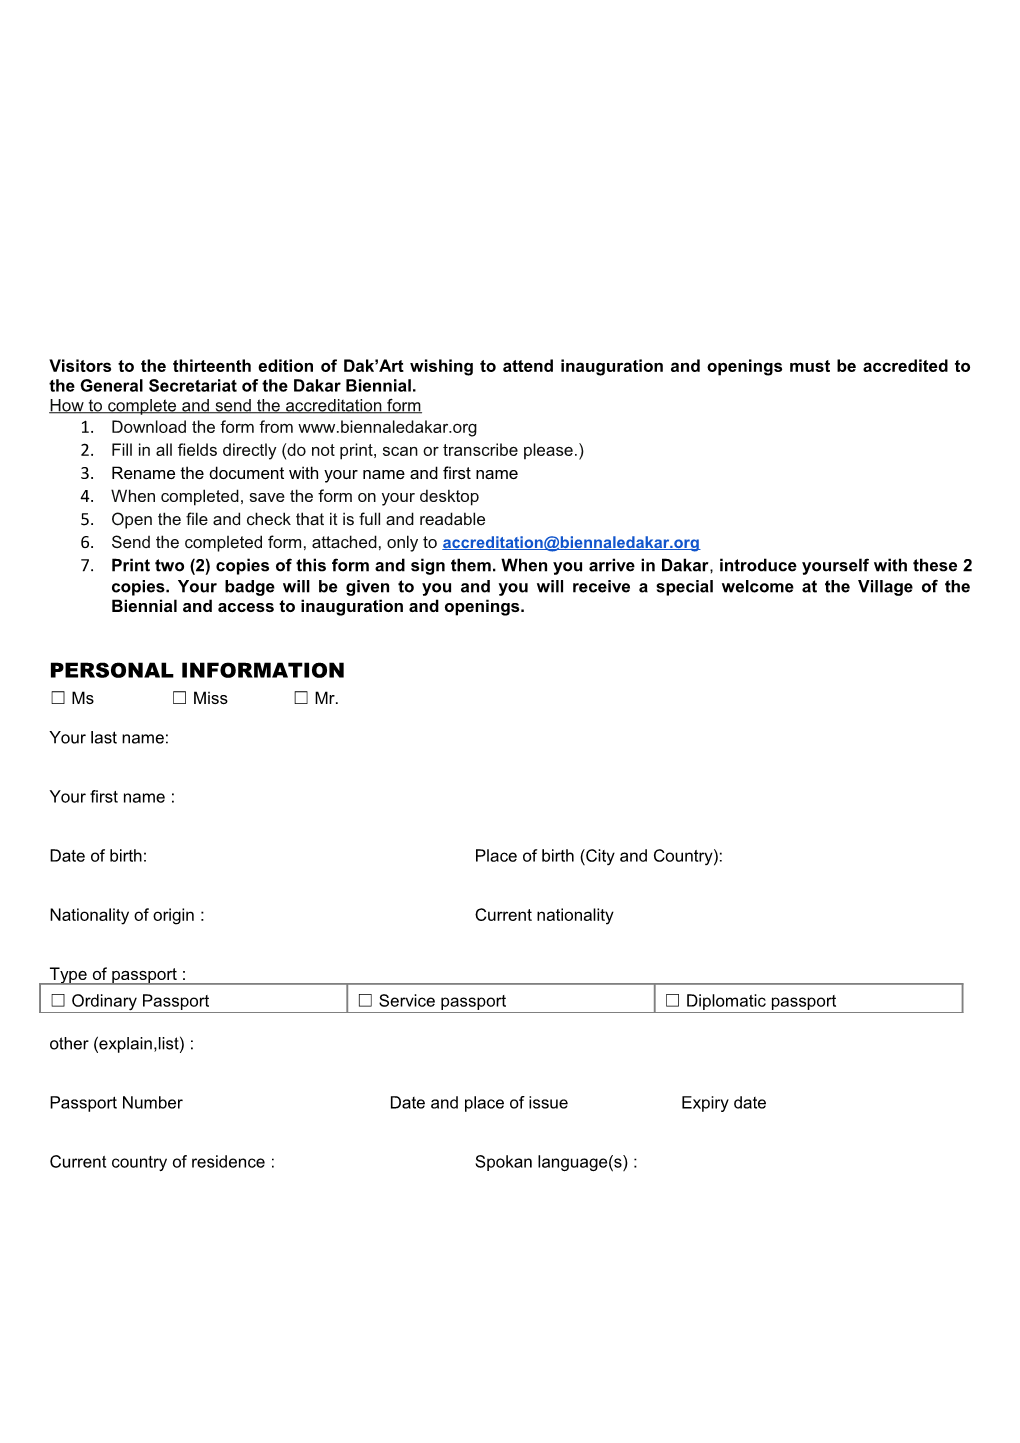 How to Complete and Send the Accreditation Form